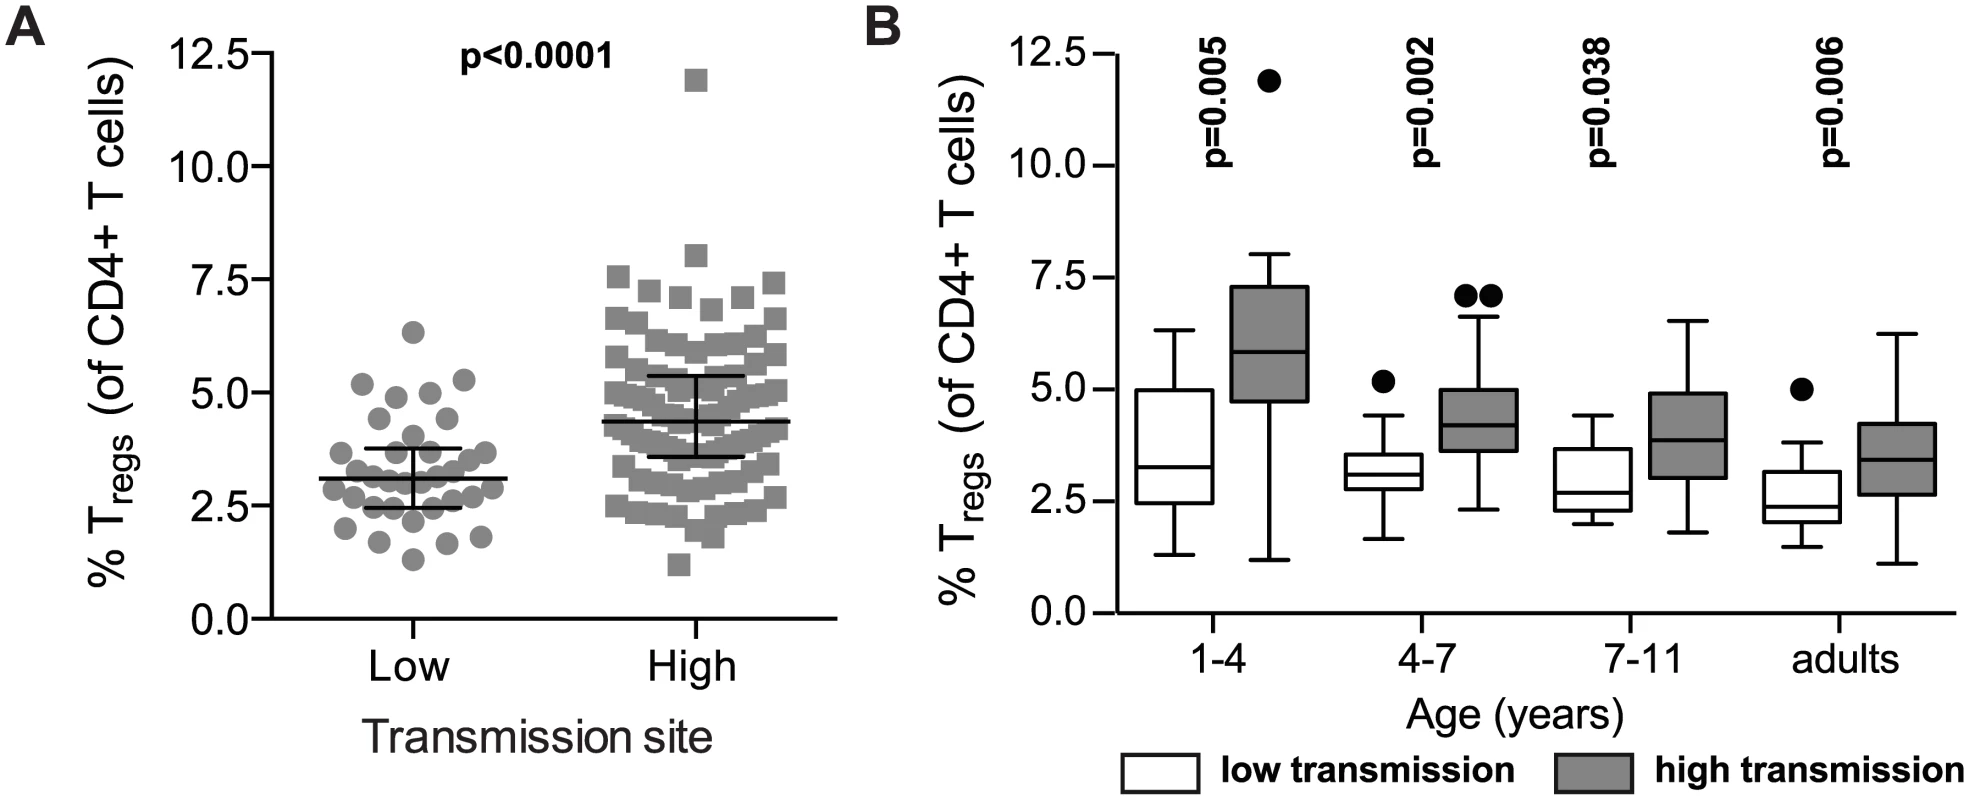 FoxP3+ regulatory T cells are increased in high compared to low transmission settings, but decrease with age only in highly exposed children.